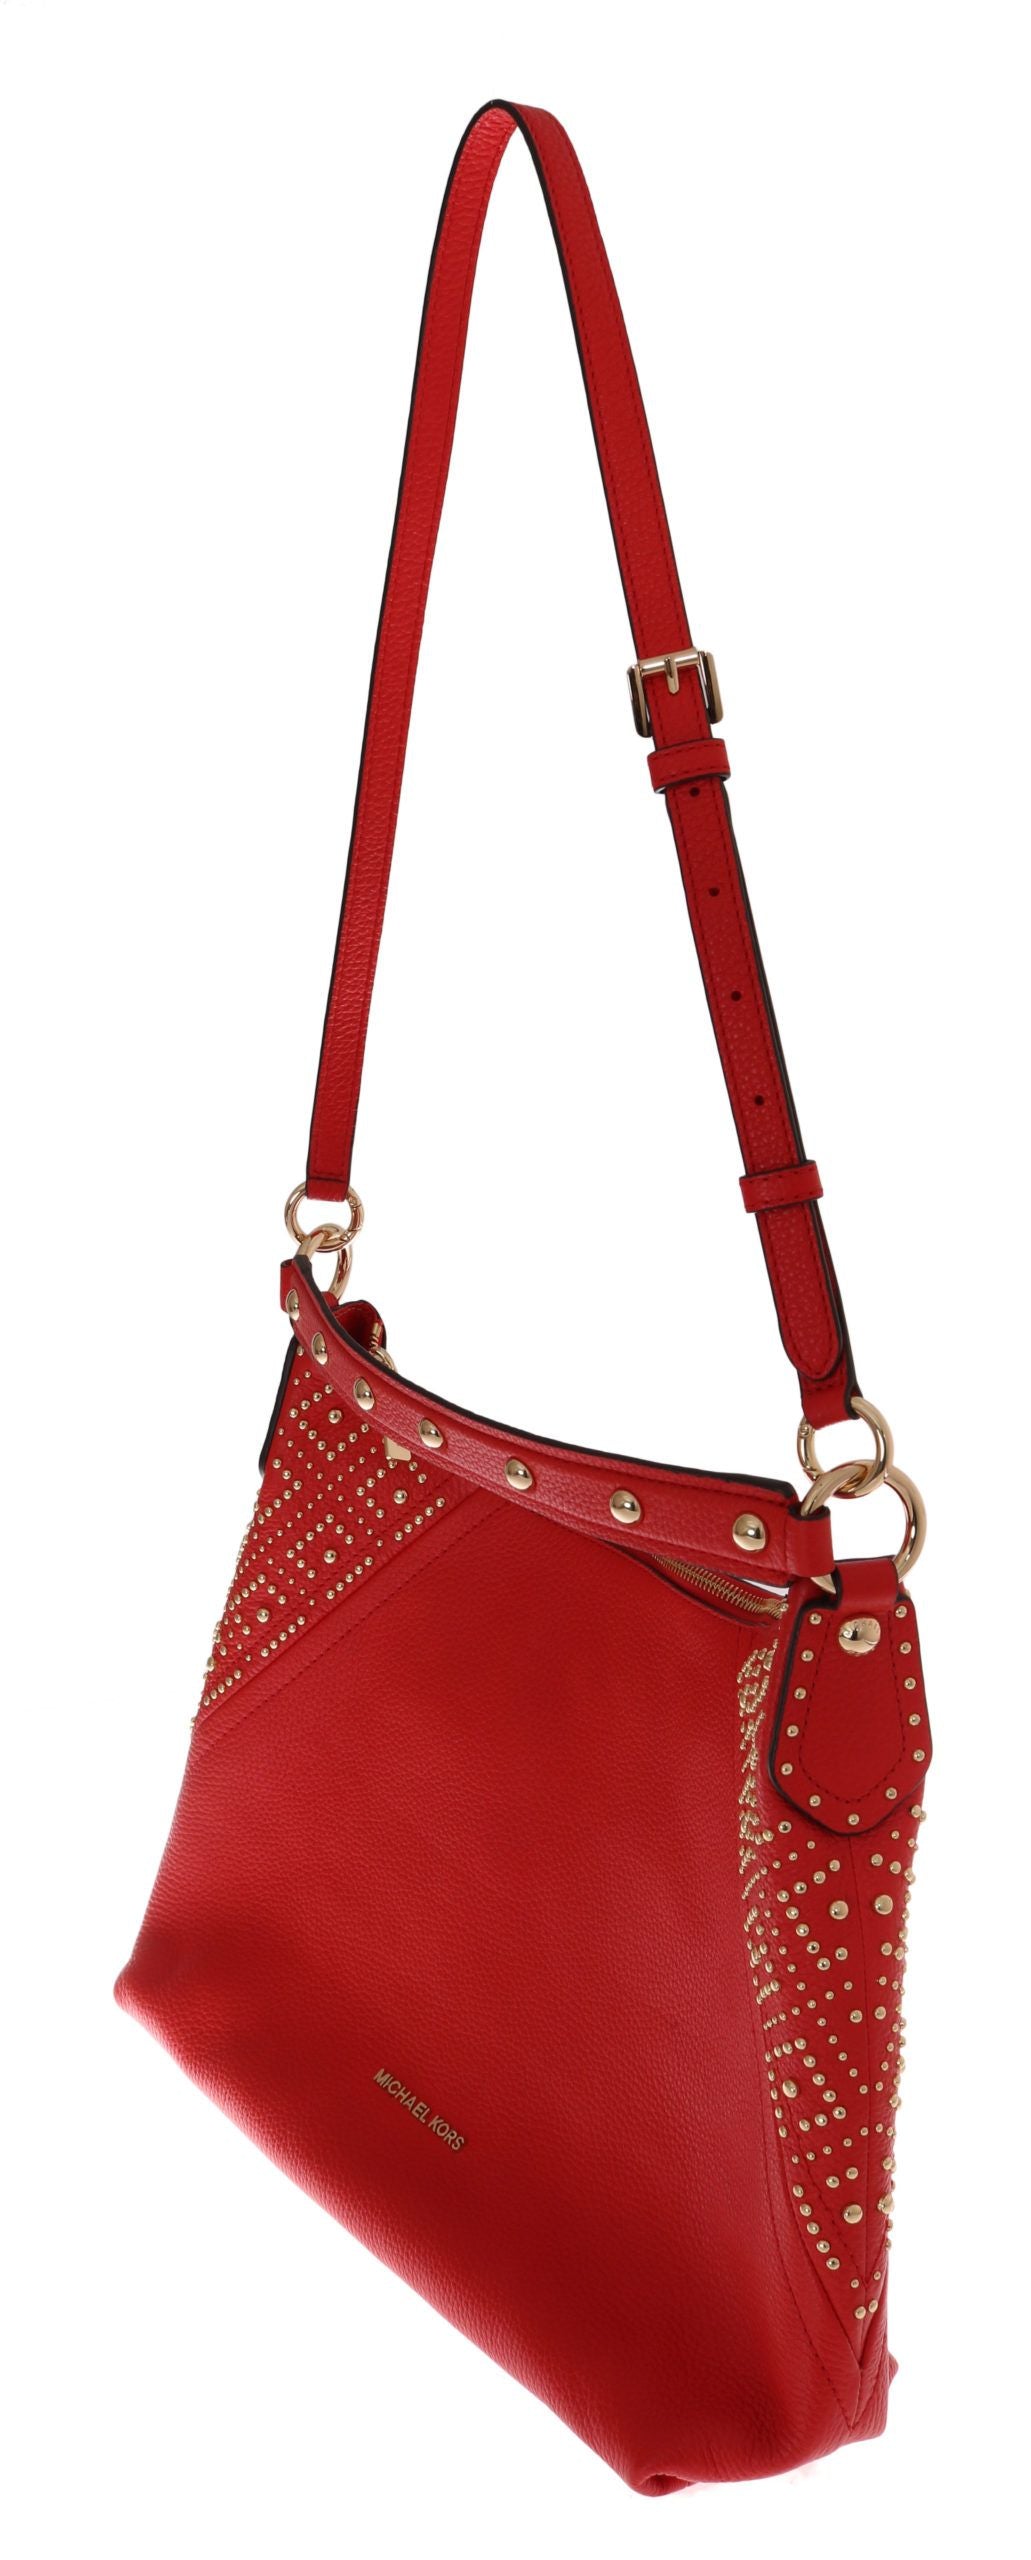 Chic Red Leather ARIA Shoulder Bag